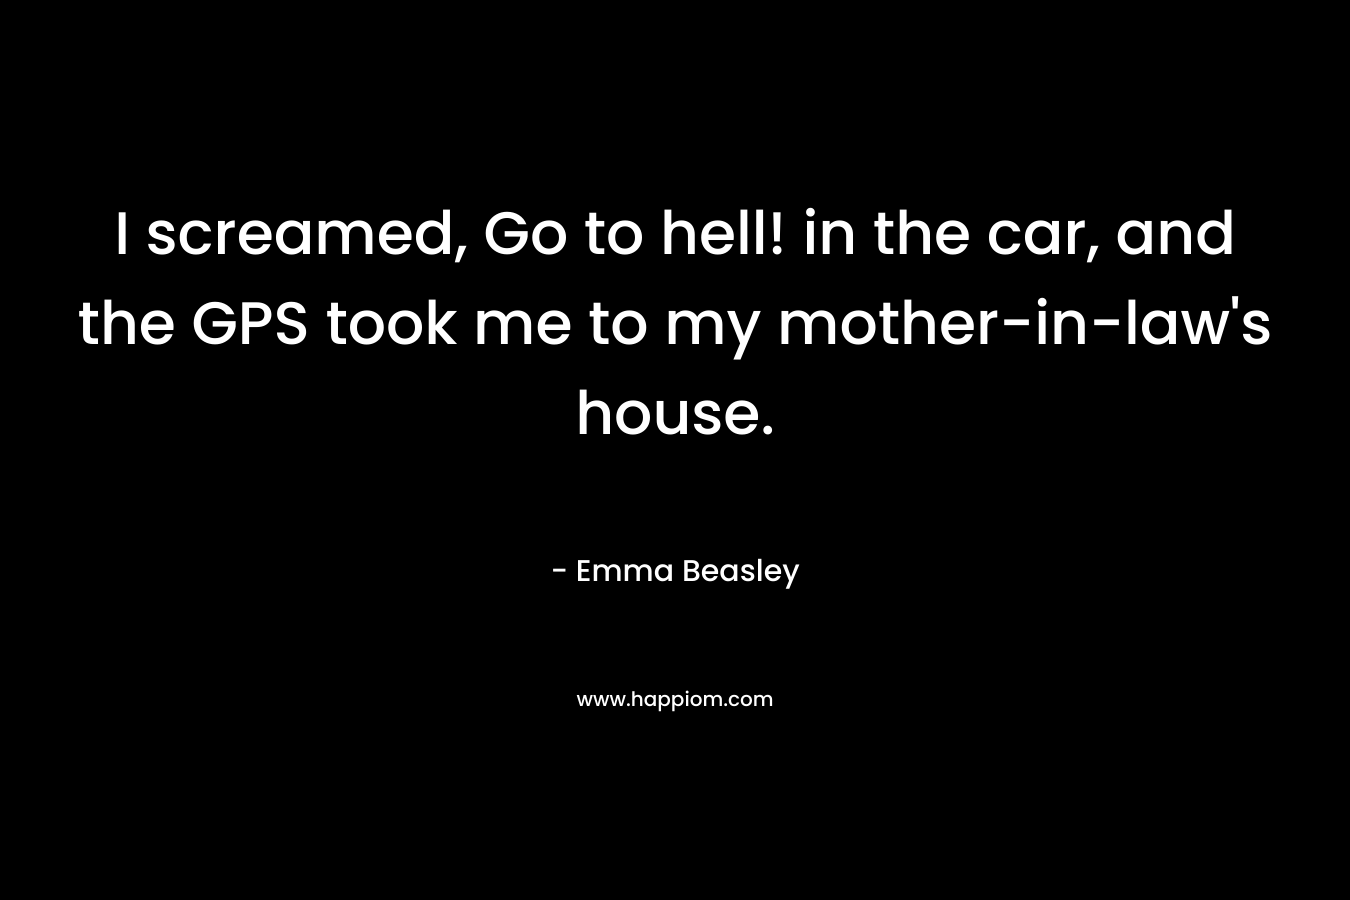 I screamed, Go to hell! in the car, and the GPS took me to my mother-in-law’s house. – Emma Beasley